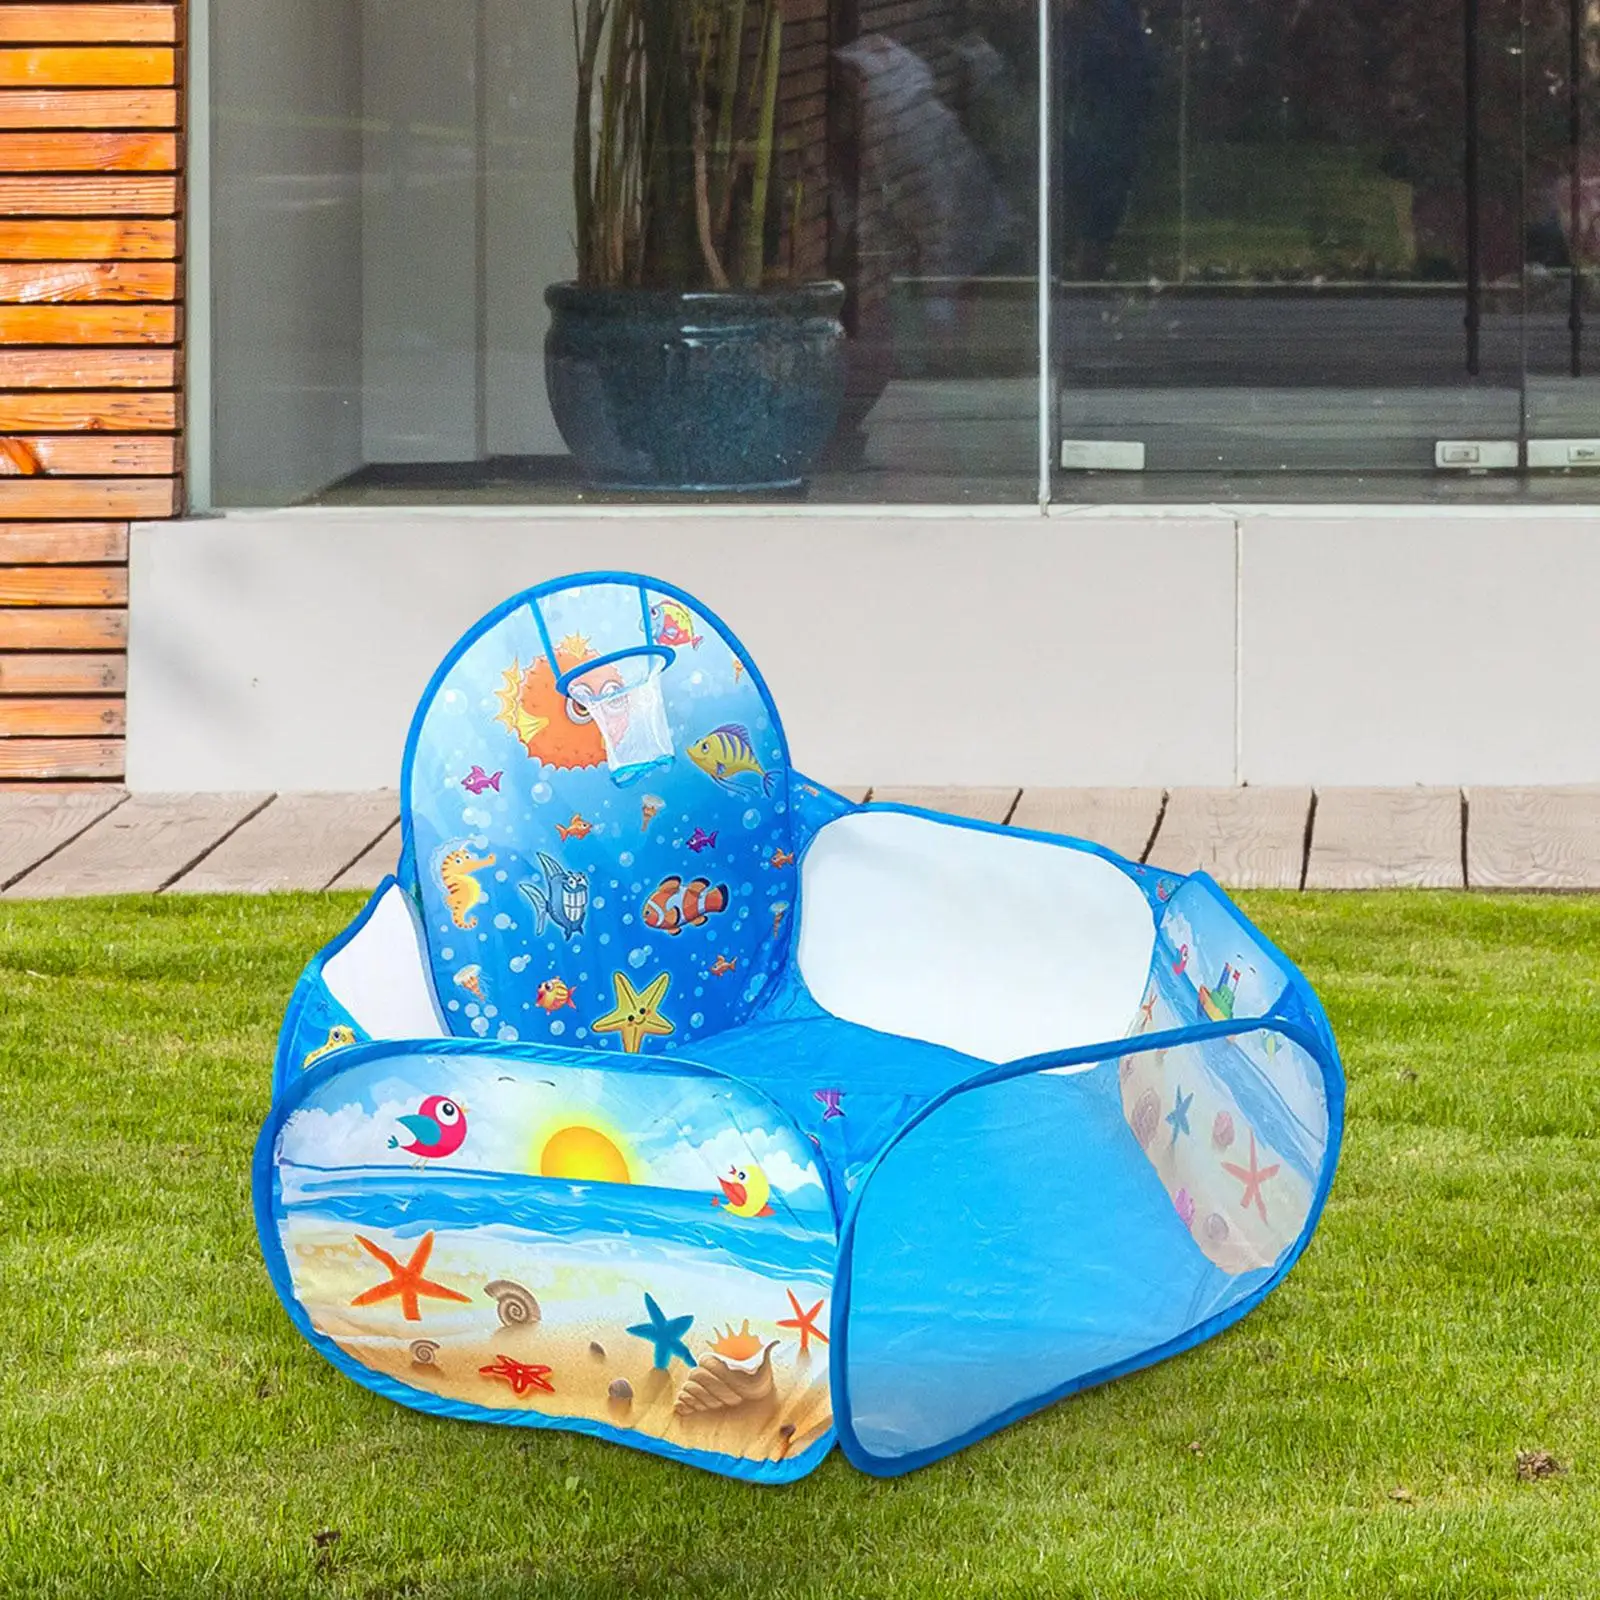 Kids Play Tent Gift with Basketball Hoop Playpen Ball Pool Foldable Tent for Boy Girls Kids Toddlers Outdoor Indoor Play